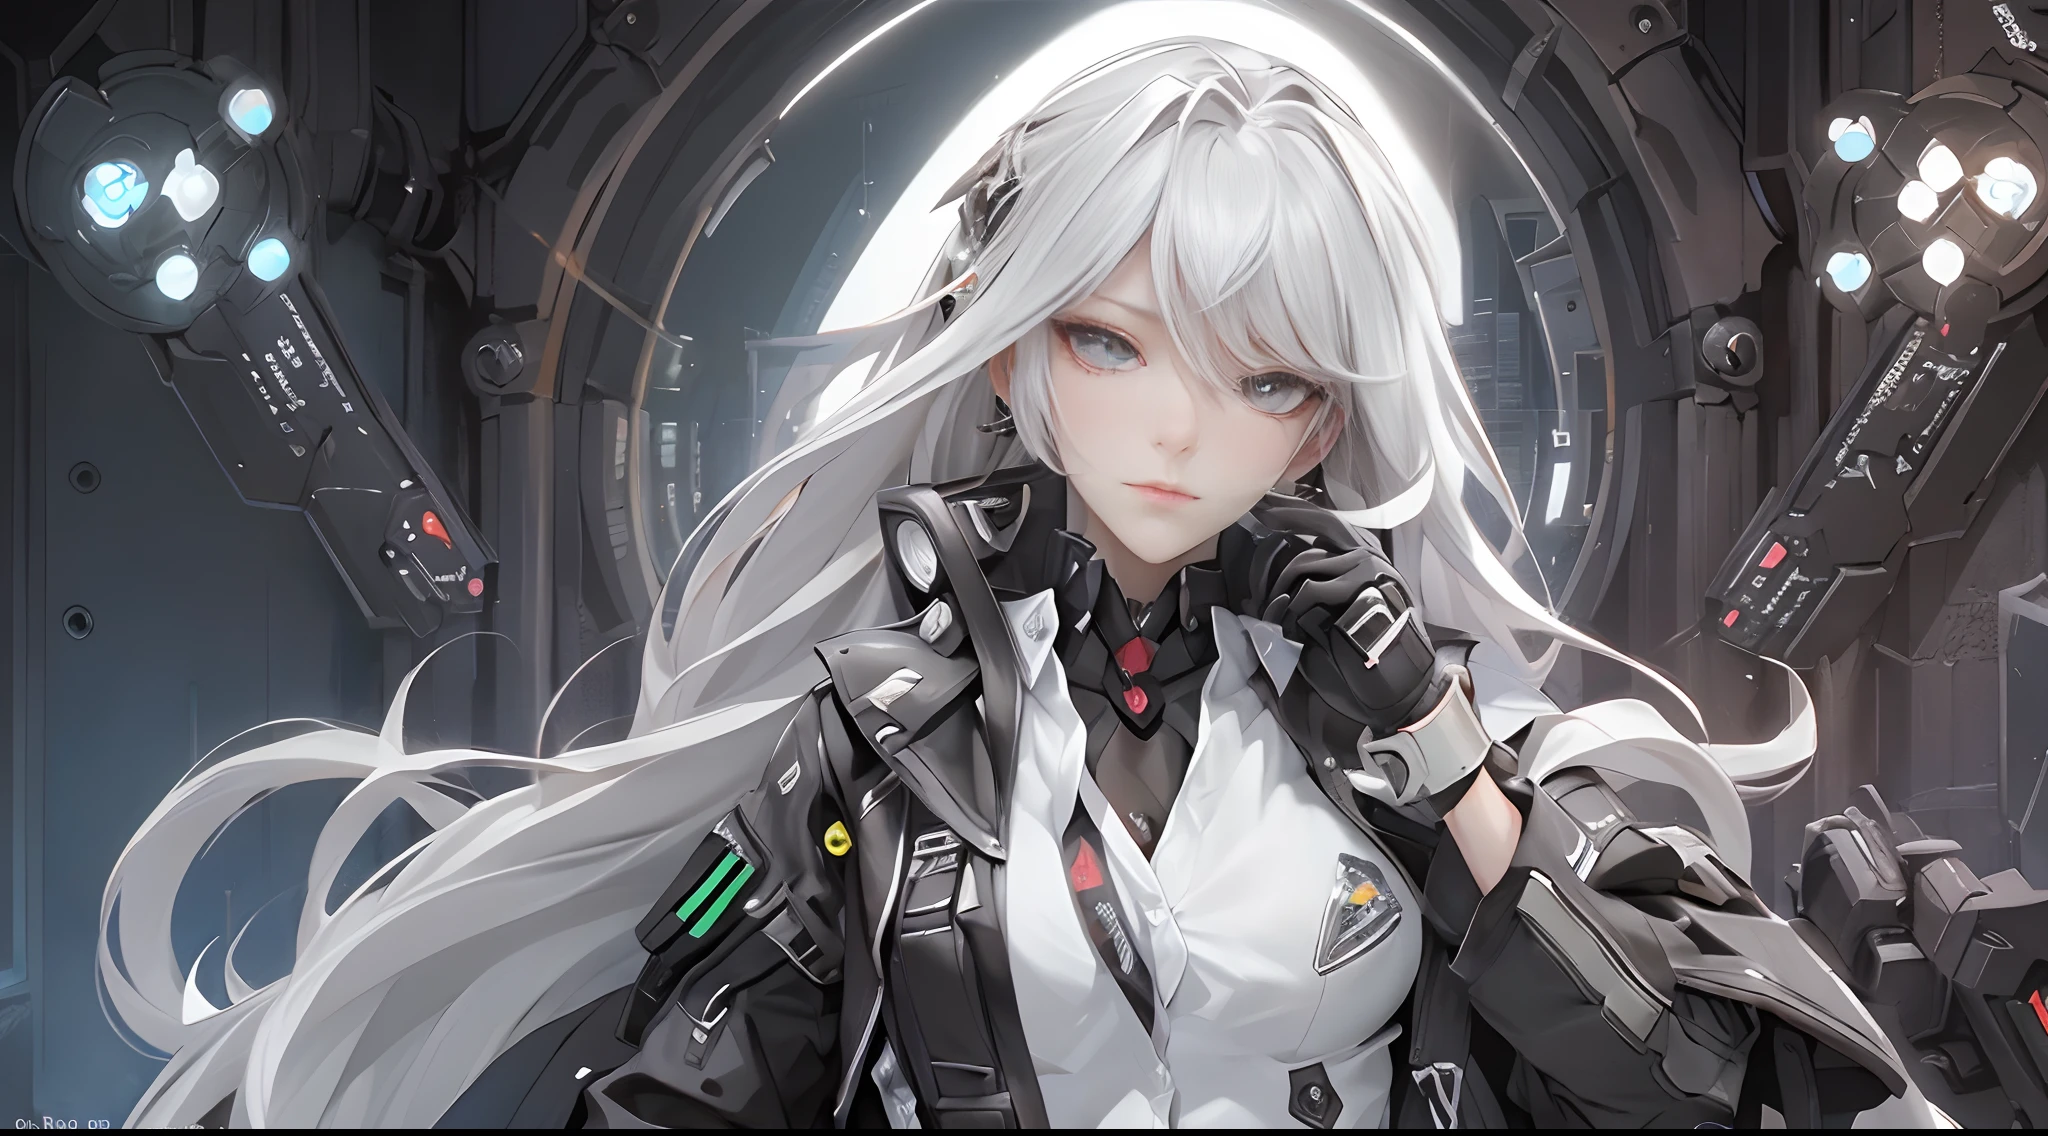 masterpiece, (best quality), (ultra-detailed), (ultra-realistic:1.2), landscape, sci-fi, transistorpunk, cyberpunk, biopunk, (magazine cover:1.4), (gray, white), female huge robot, visor, earring, mechanical angel wings on the back, angel wings, future town, dynamic pose, dynamic angle, small breasts, luxury, (gold, silver, green), neonmasterpiece, (best quality), (ultra-detailed), (ultra-realistic:1.2), landscape, sci-fi, transistorpunk, cyberpunk, biopunk, (magazine cover:1.4), (gray, white), 8k, UHD, The alone long waist white hair woman as the lone character as a magazine, yellow eyes, gold eyes, hair accessory, floating alone , high resolution, sci-fi city , Hyper detail mature face, black strapless bodysuit, white shirt, black panty, black jacket, black glove, ultra sharp, red necktie, black string full leg stocking, black string high thigh kneesock , exposed leg , black boot, feet visible, Hand Visible , twin sword, twin floating equipment, detail finger, 5 finger, Shooting pose，action pose,explosion effect, a determined expression on her face。